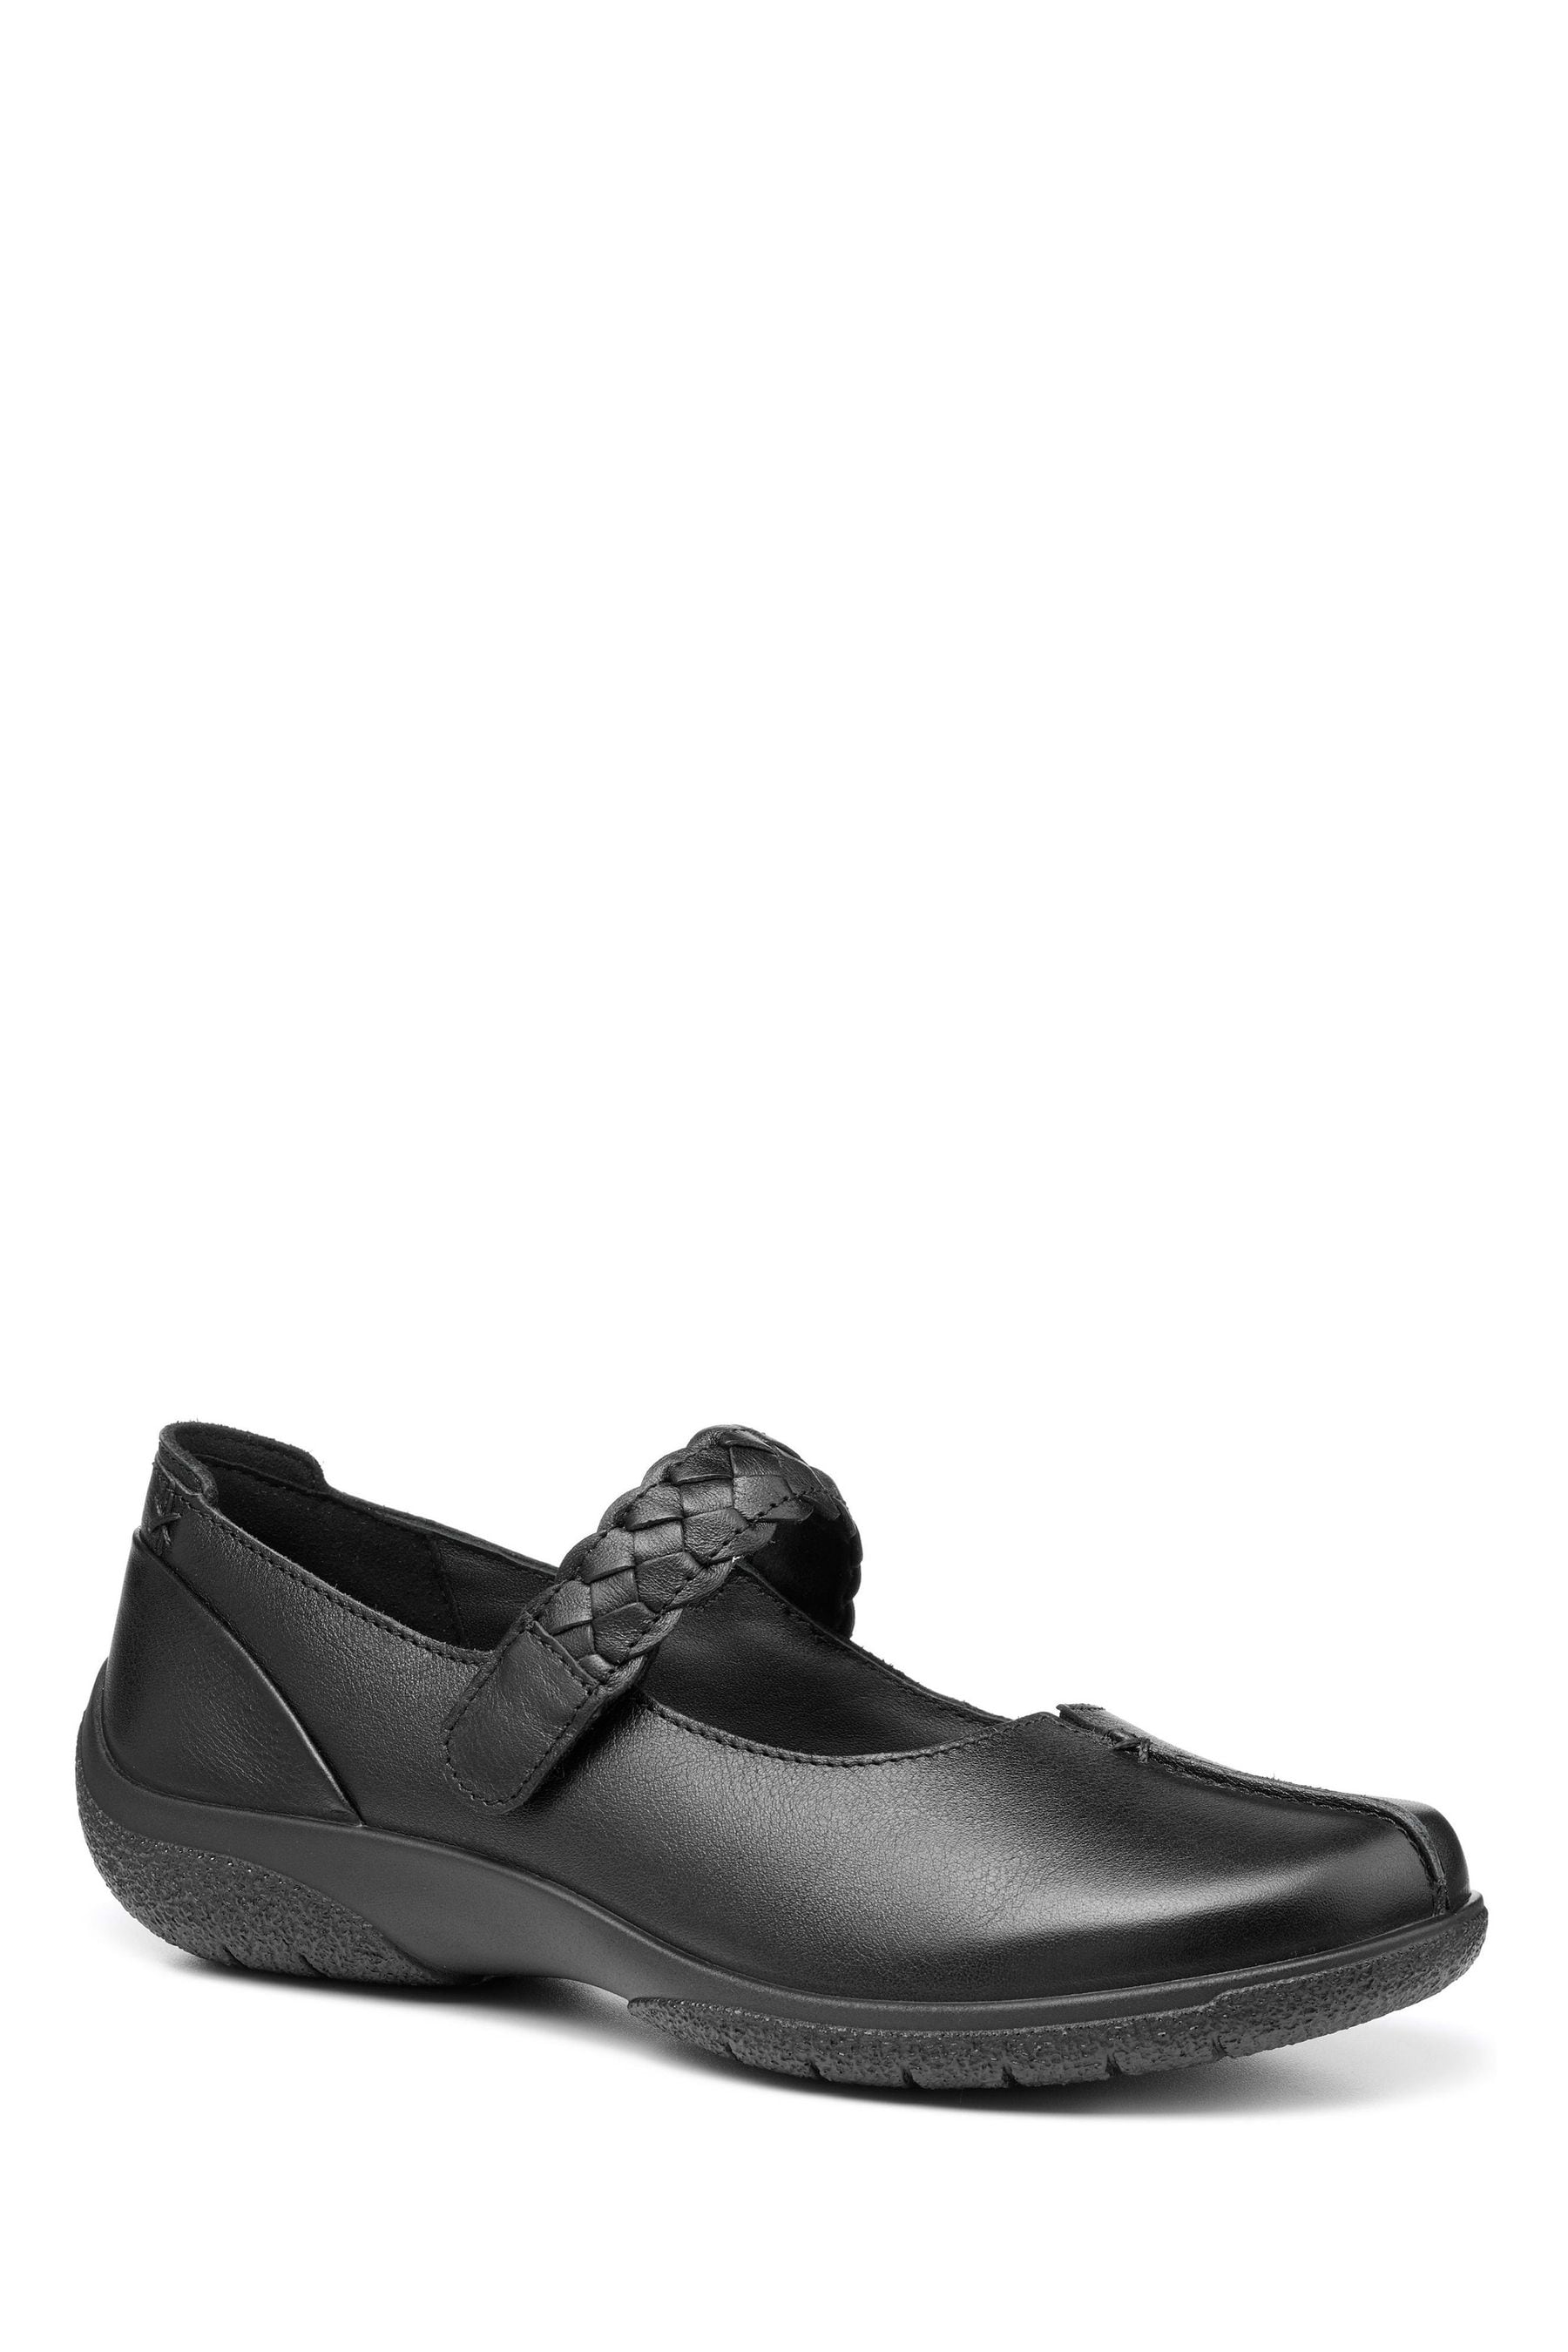 Buy Hotter Black Hotter Shake II Touch-Fastening X Wide Shoes from the ...